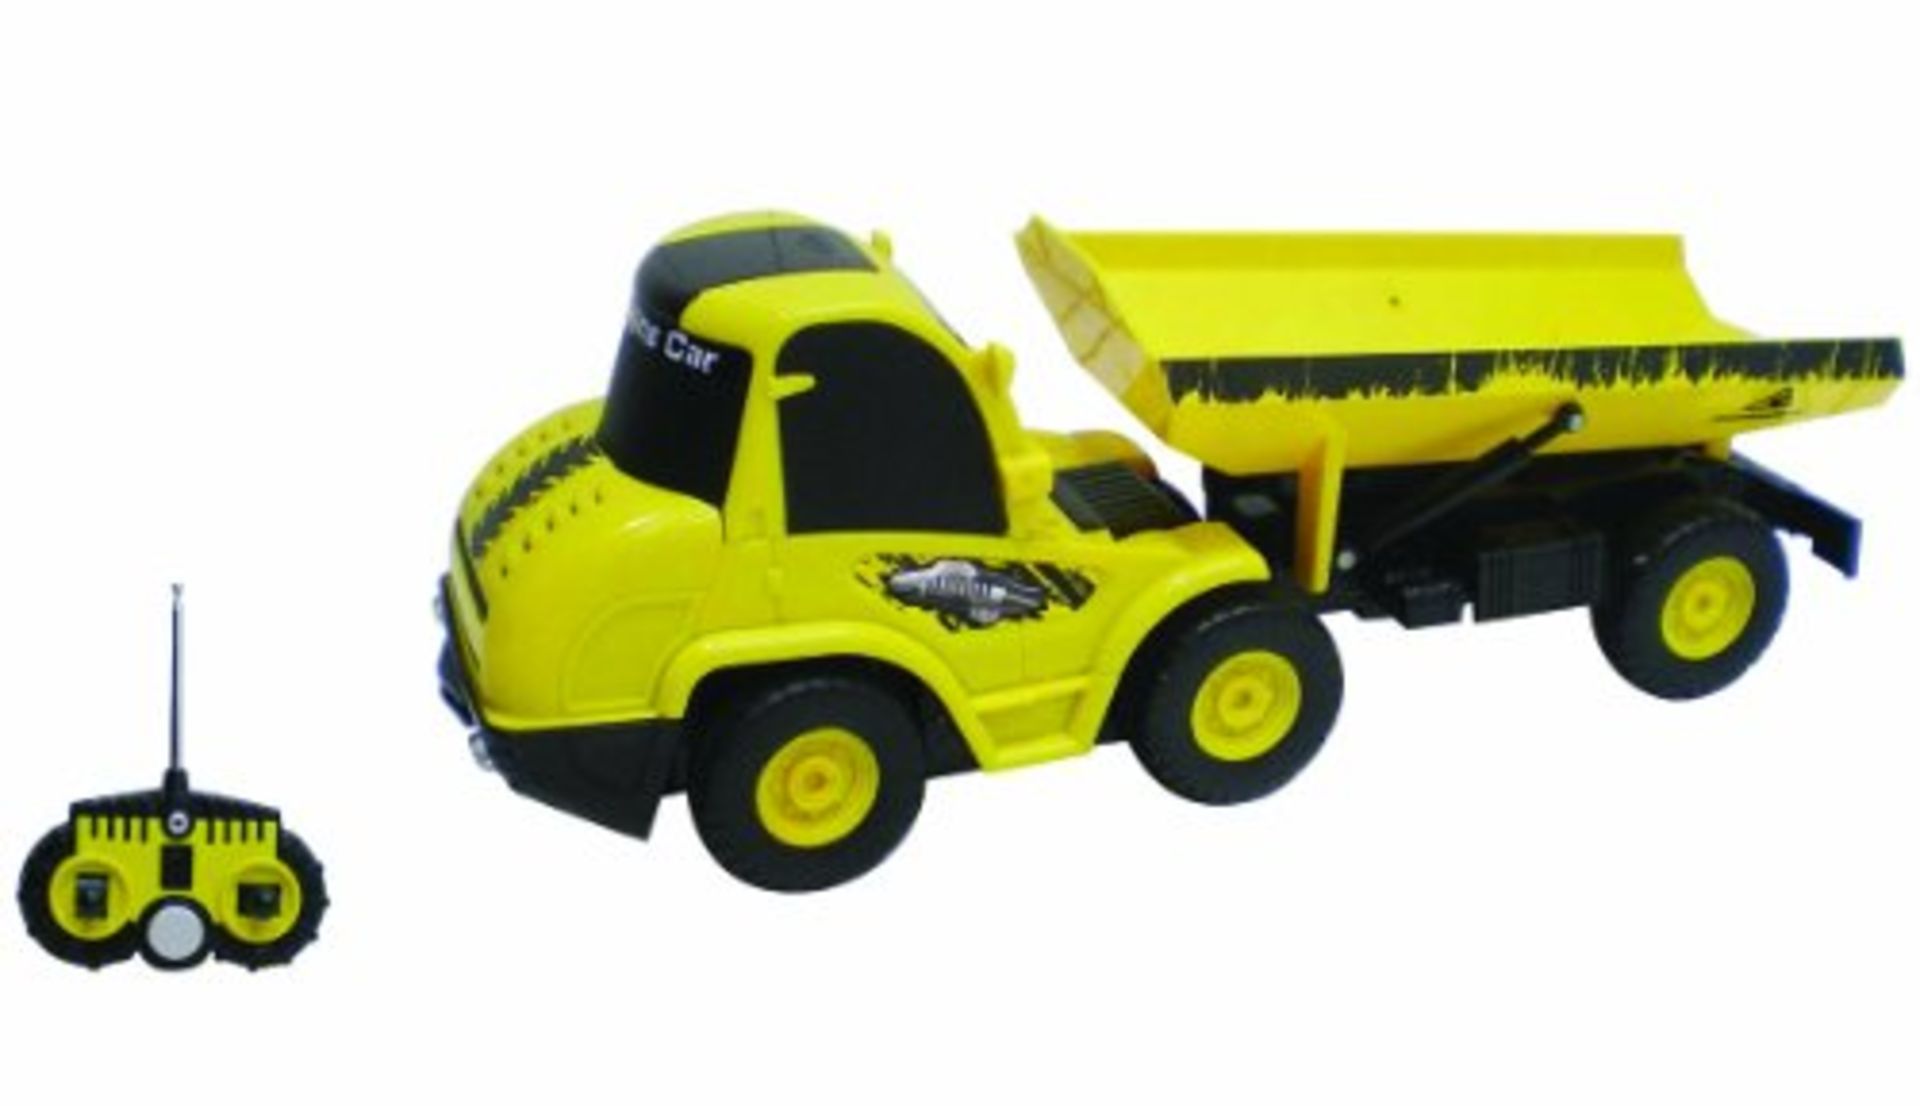 V *TRADE QTY* Brand New 1:20 Remote Control Construction Tipper Vehicle X 3 YOUR BID PRICE TO BE